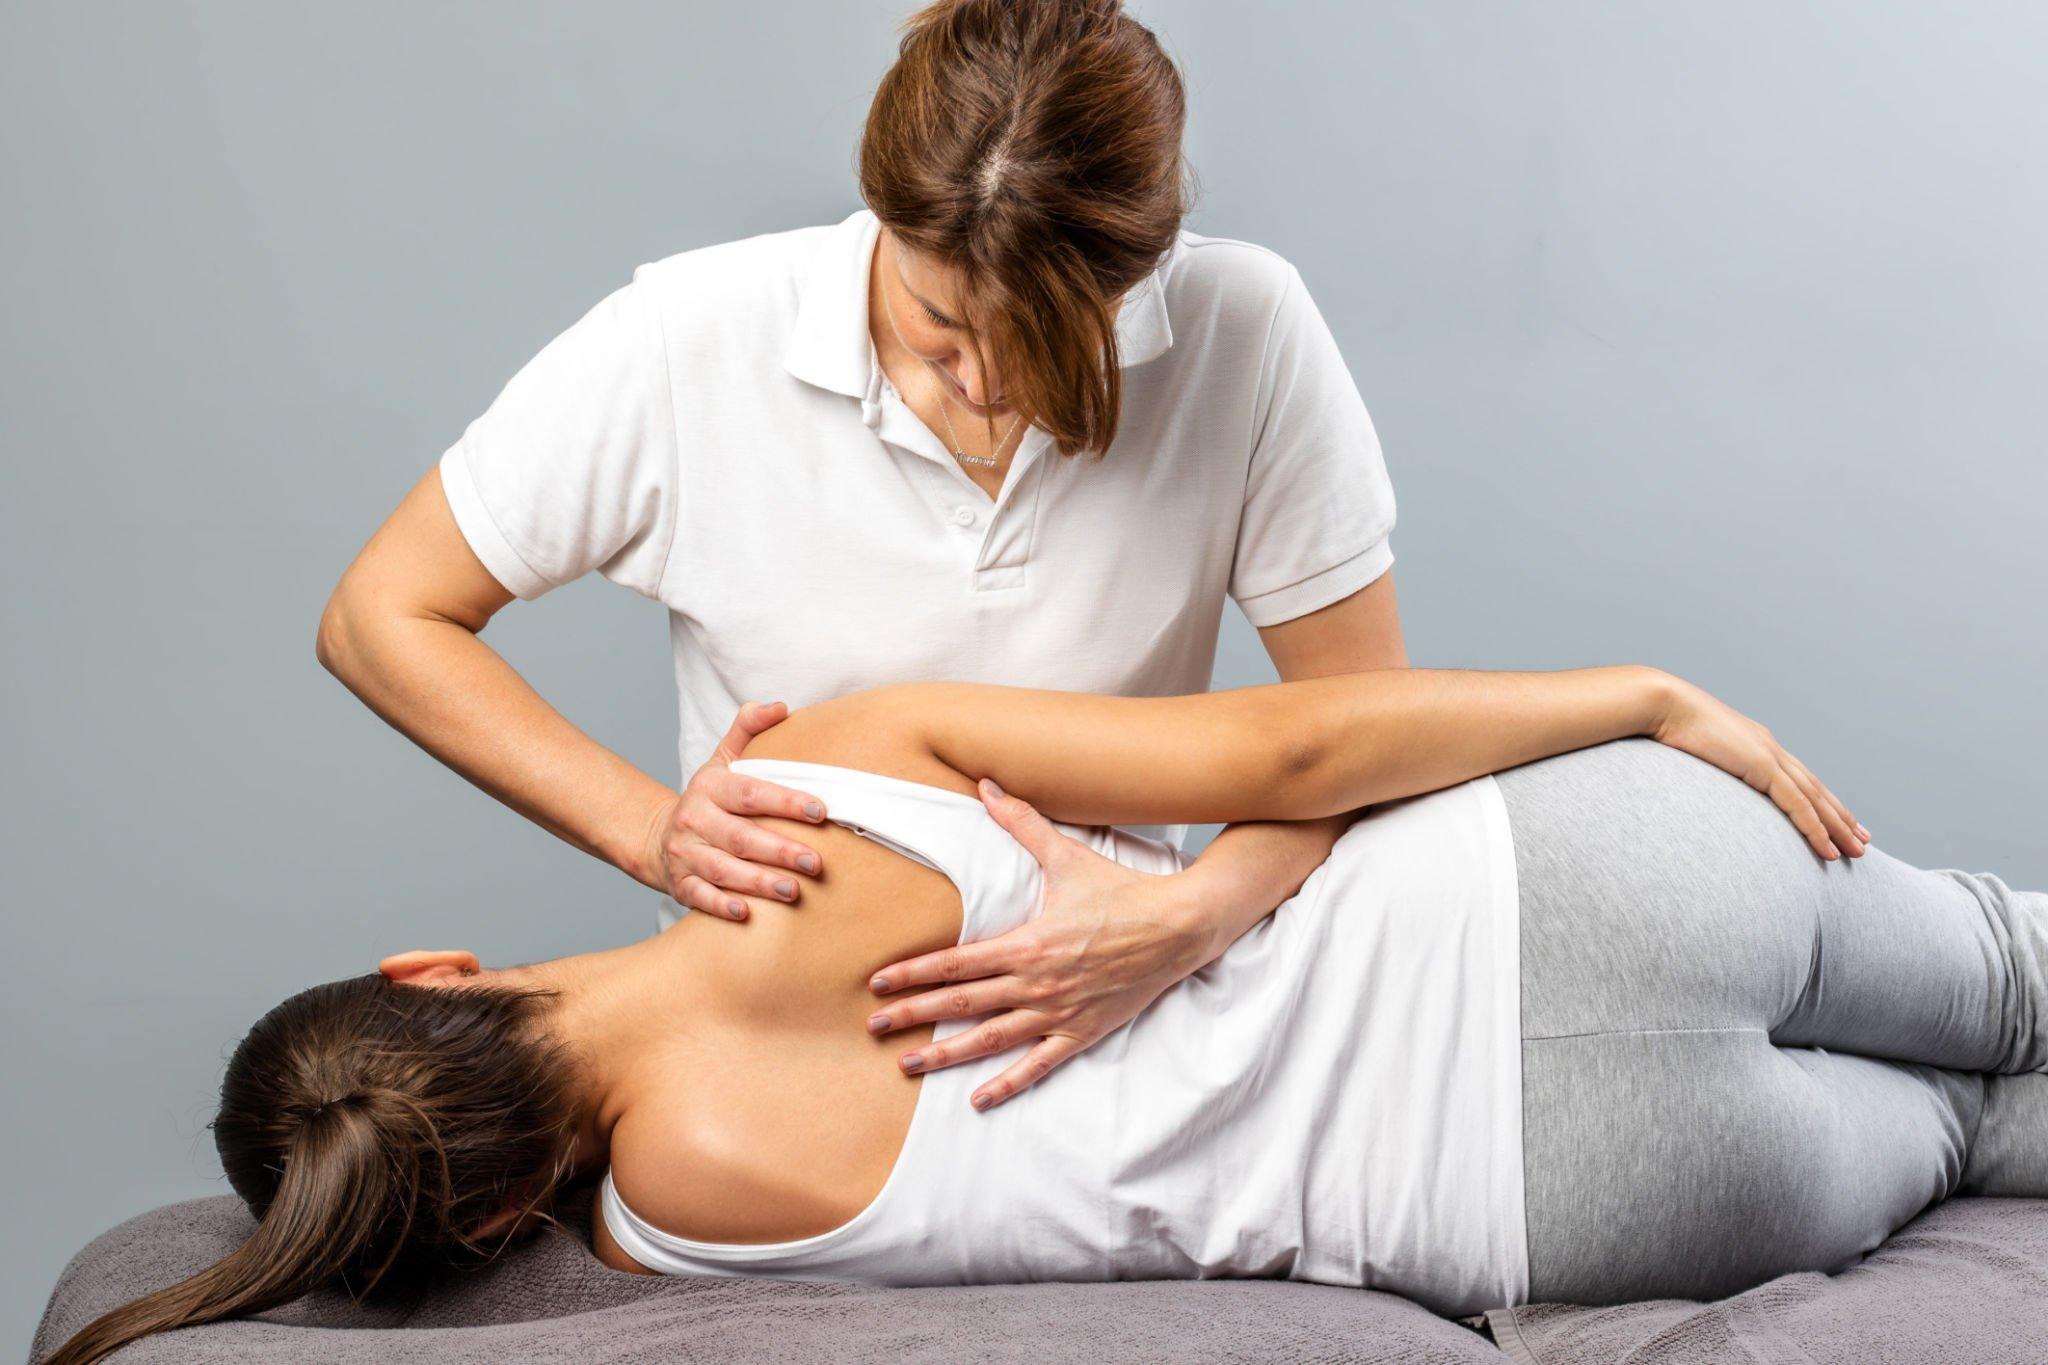 Evolve Chiropractic: McHenry's Source for Non-Invasive Spinal Adjustments and Back Pain Relief